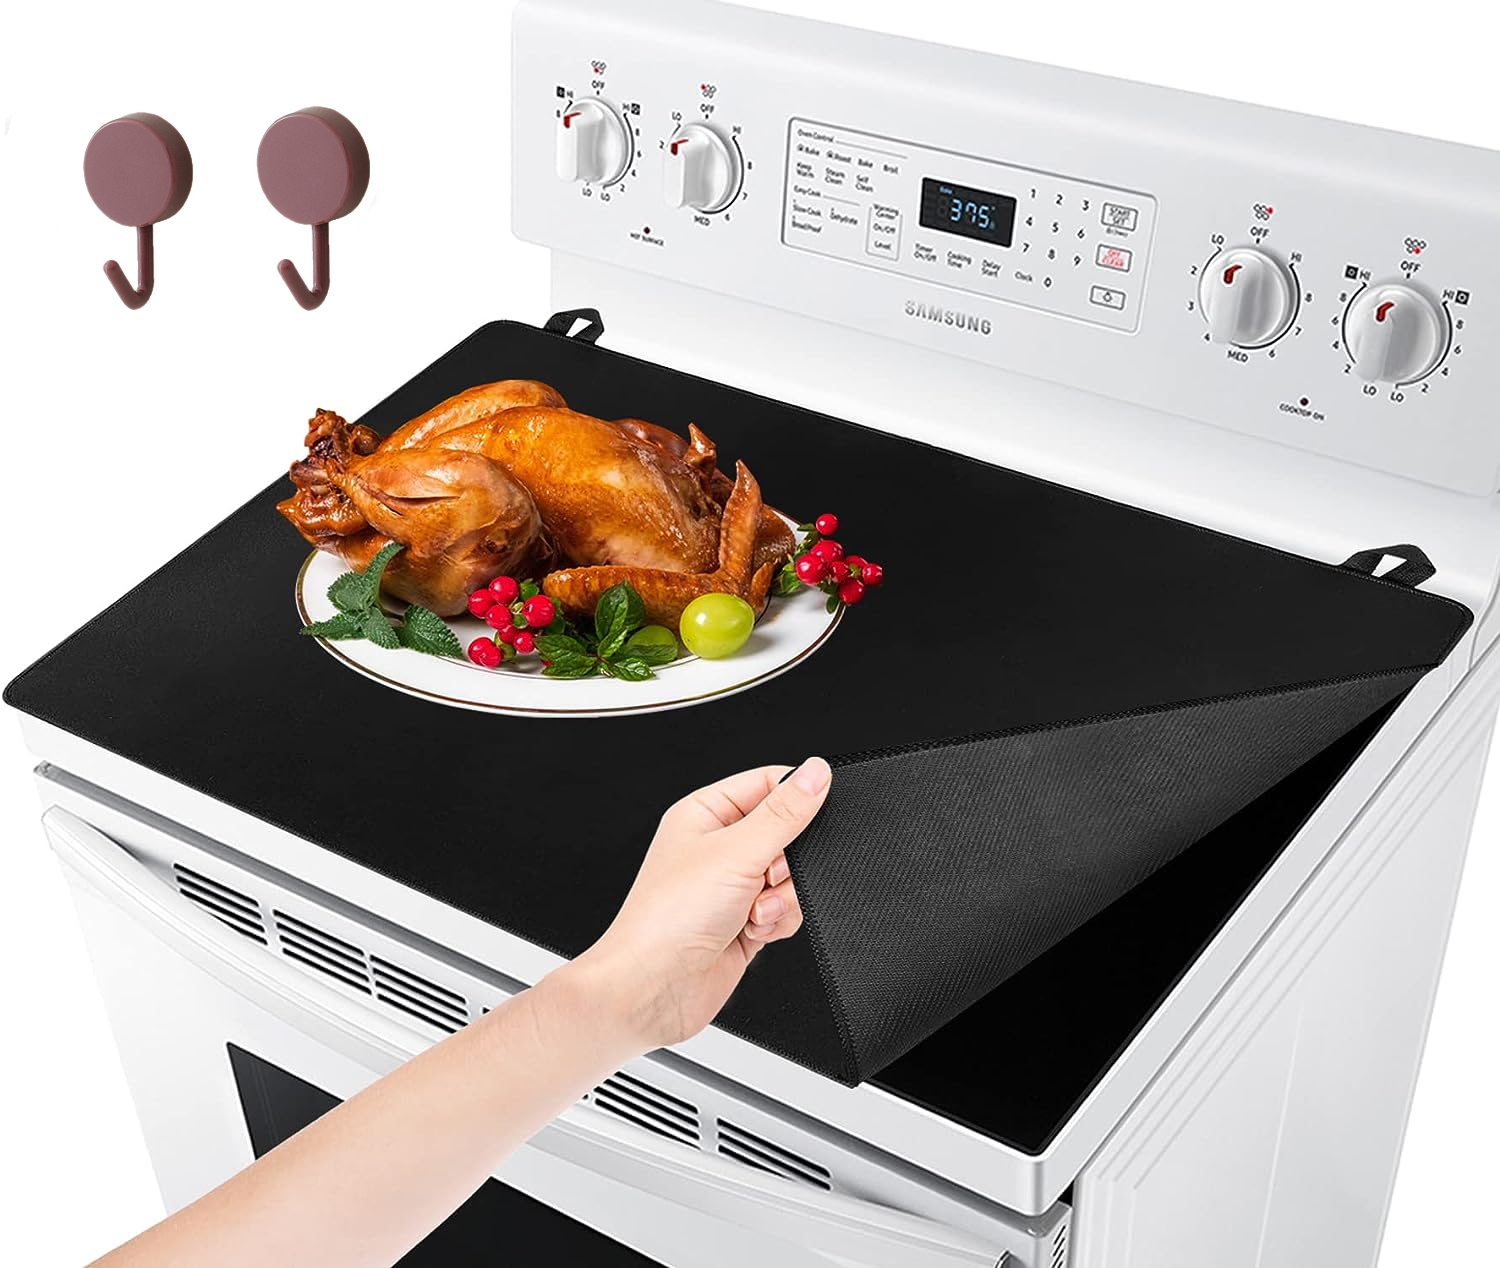 Stove Top Cover, 30.4 x 21.5 Electric Stove Cover Mat, Ceramic